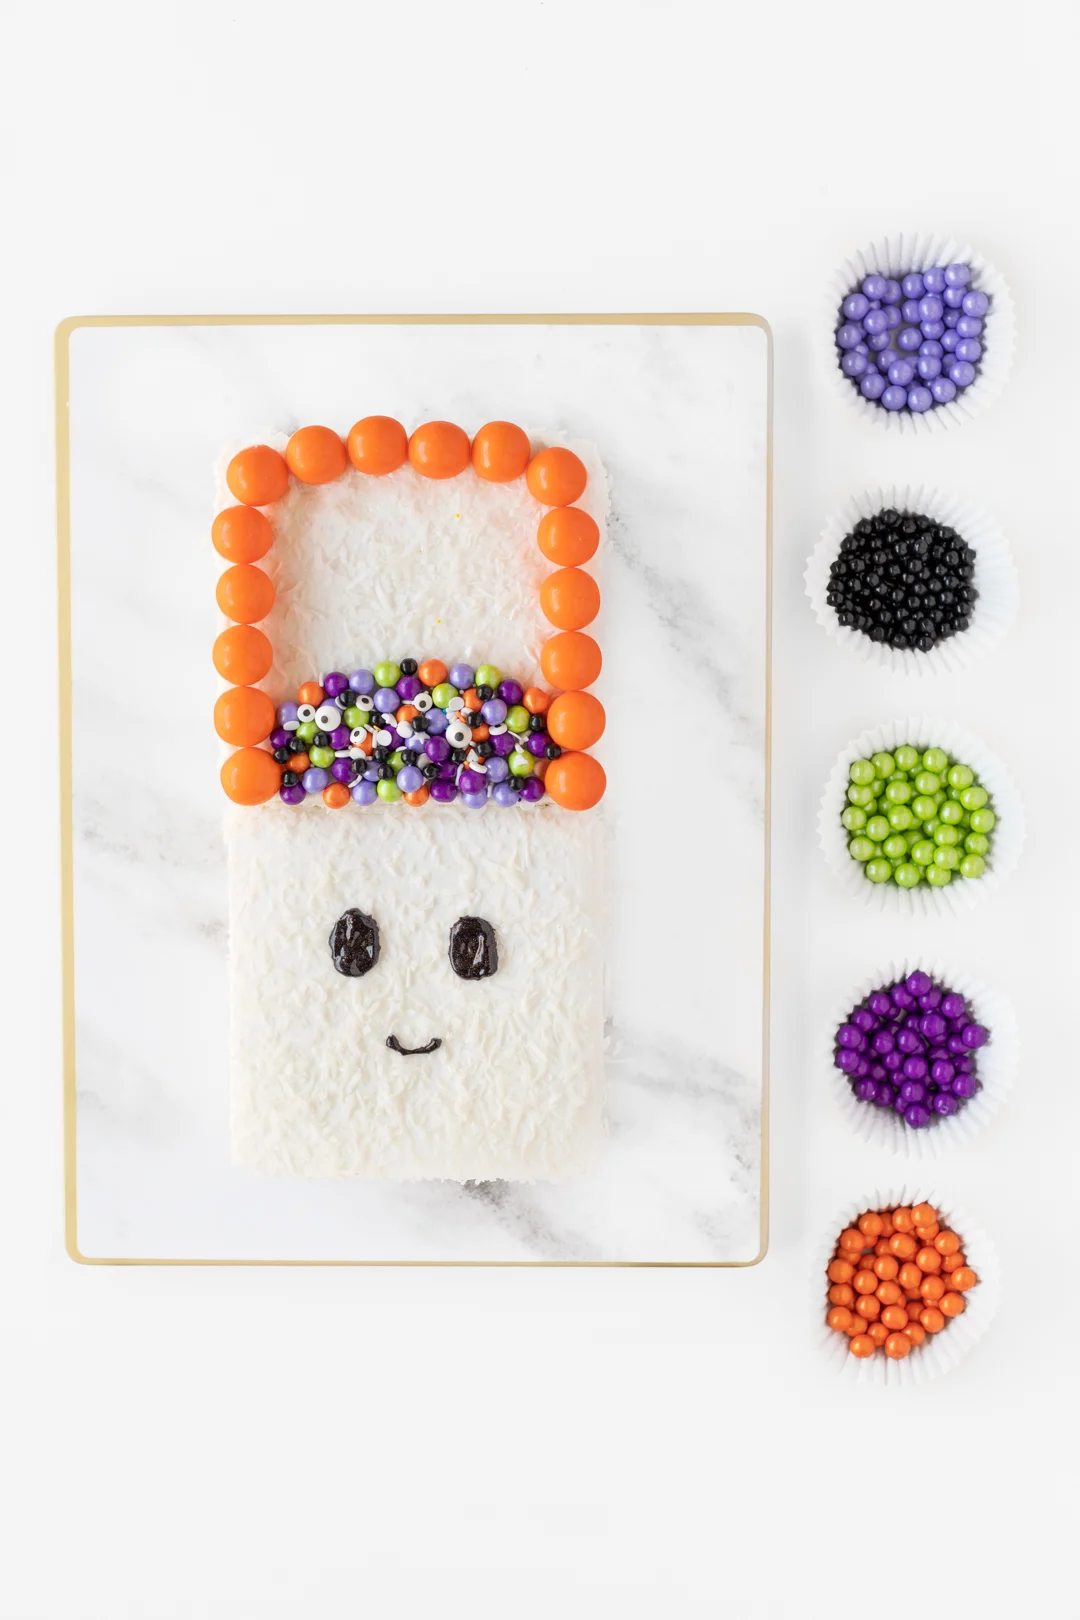 decorating a ghost cake with candies